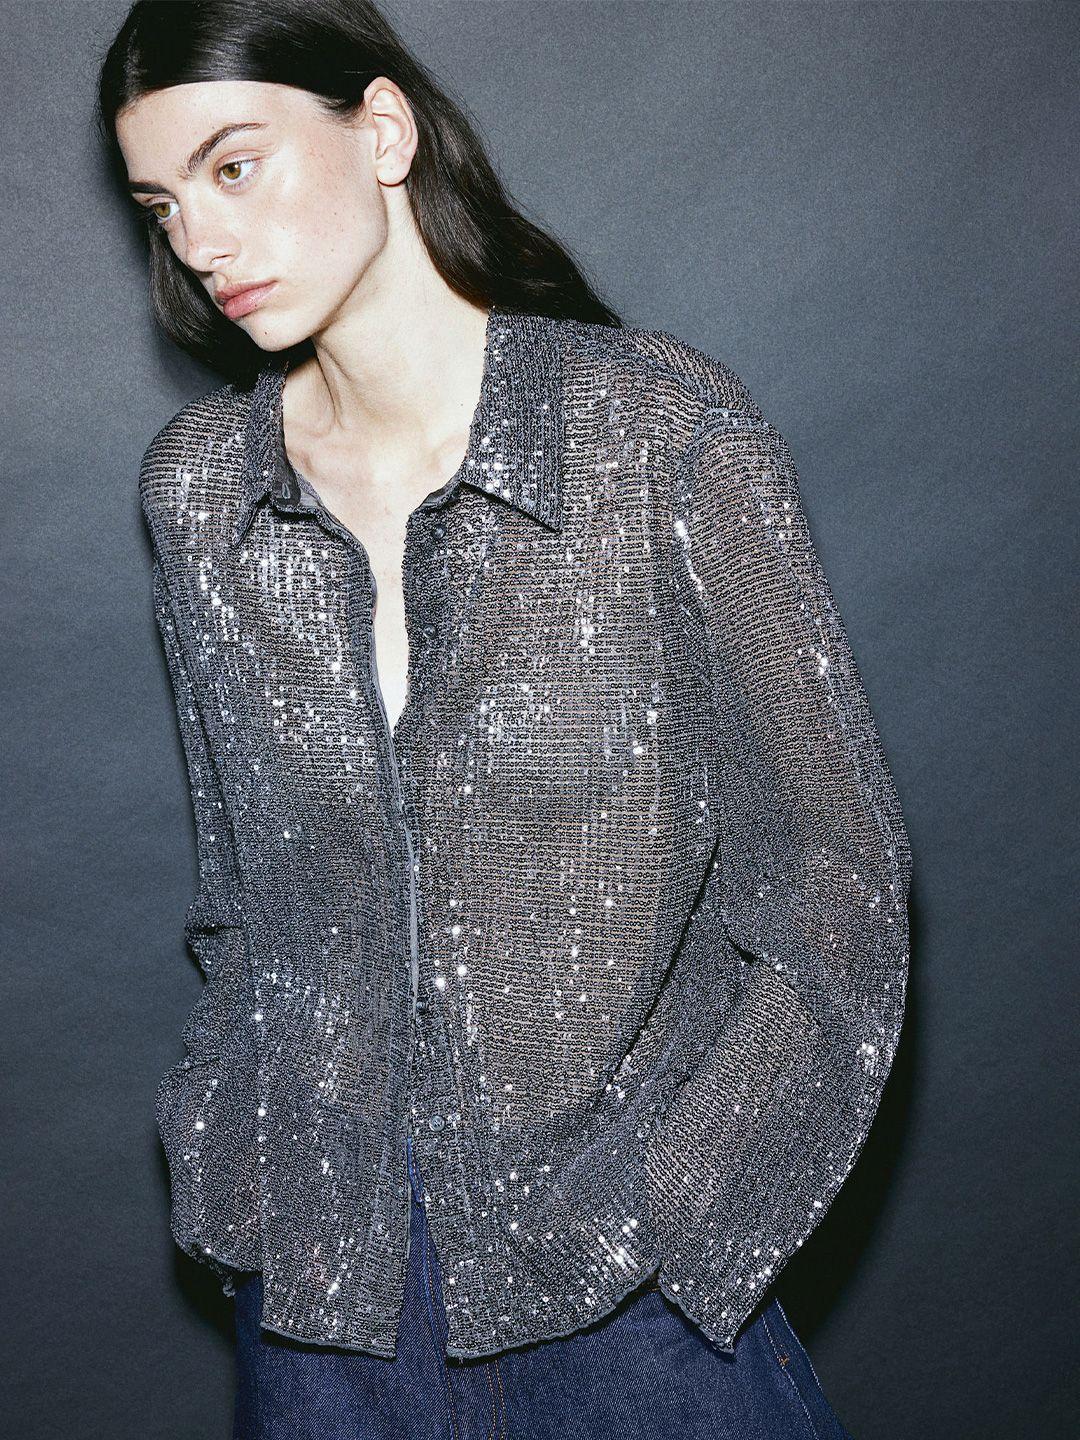 h&m sequined blouse